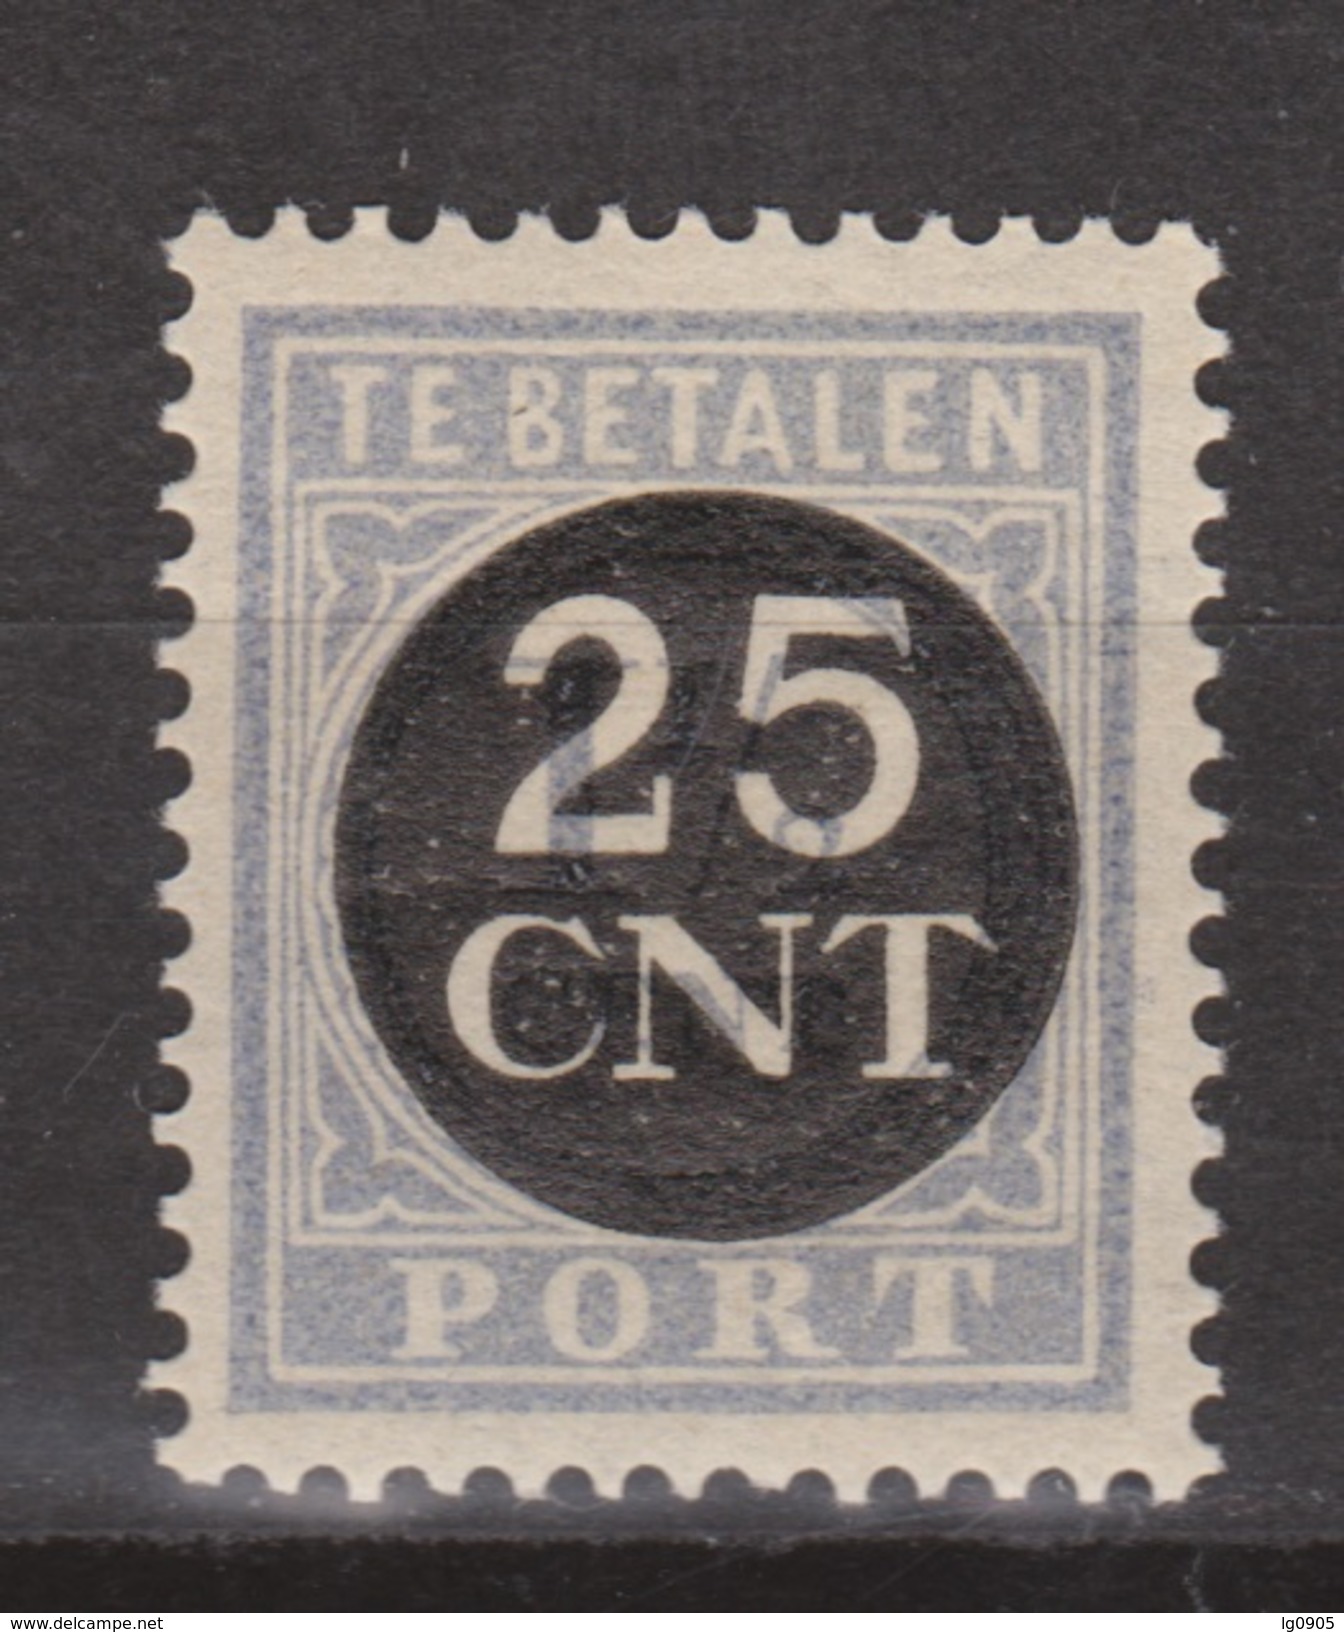 NVPH Nederland Netherlands Holanda Pays Bas Port 63 MLH Timbre-taxe Postmarke Sellos De Correos NOW MANY DUE STAMPS - Strafportzegels